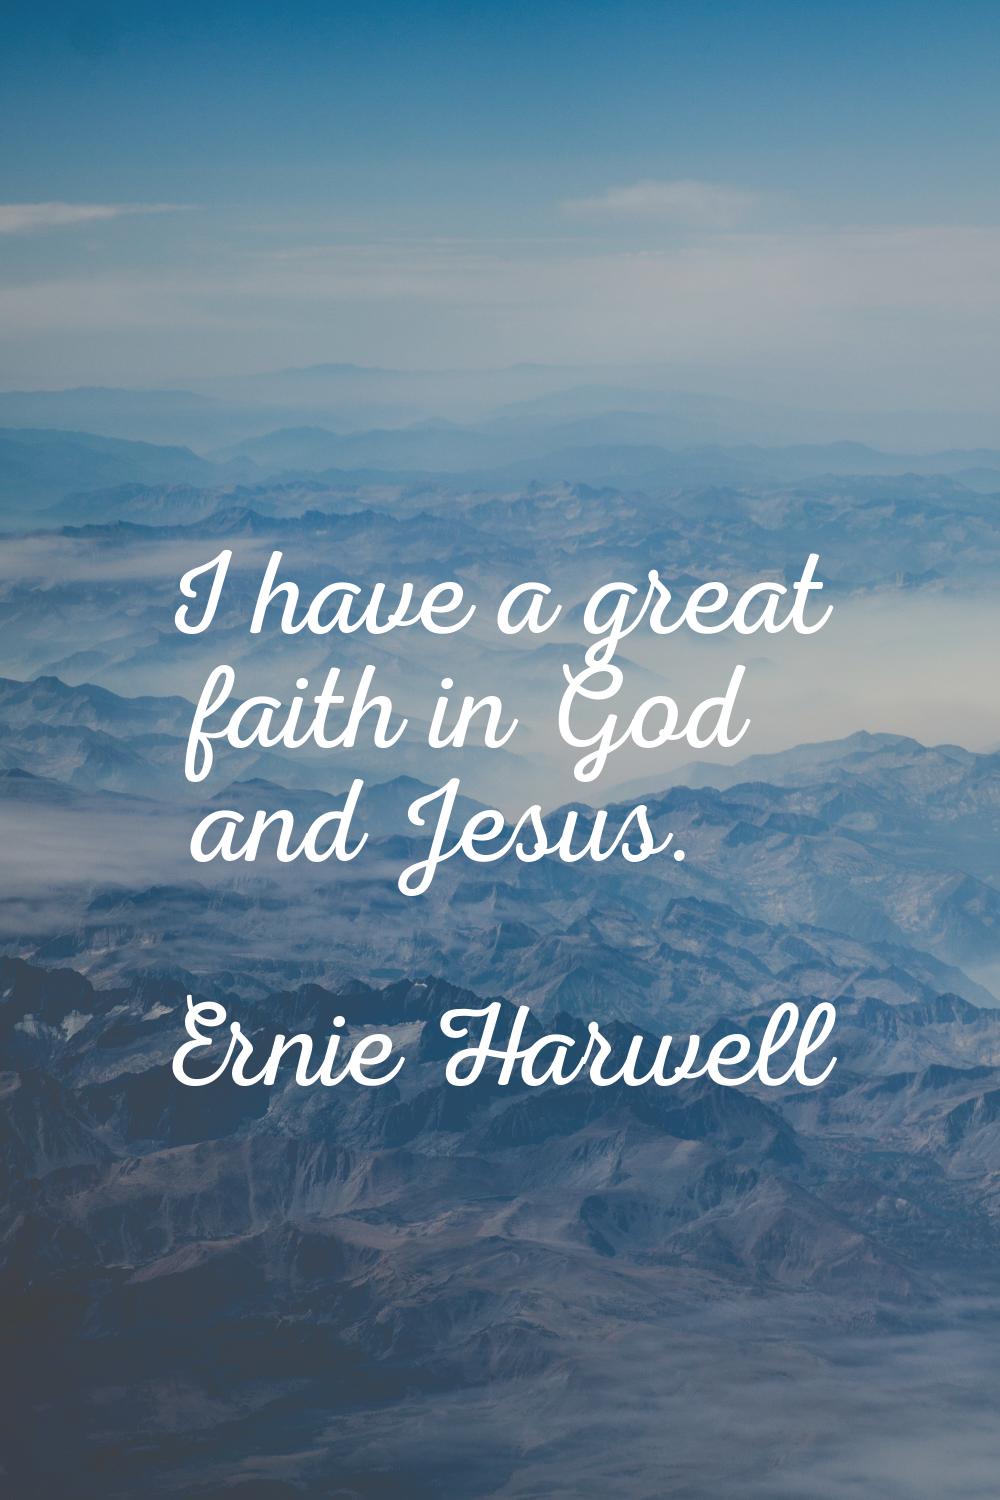 I have a great faith in God and Jesus.